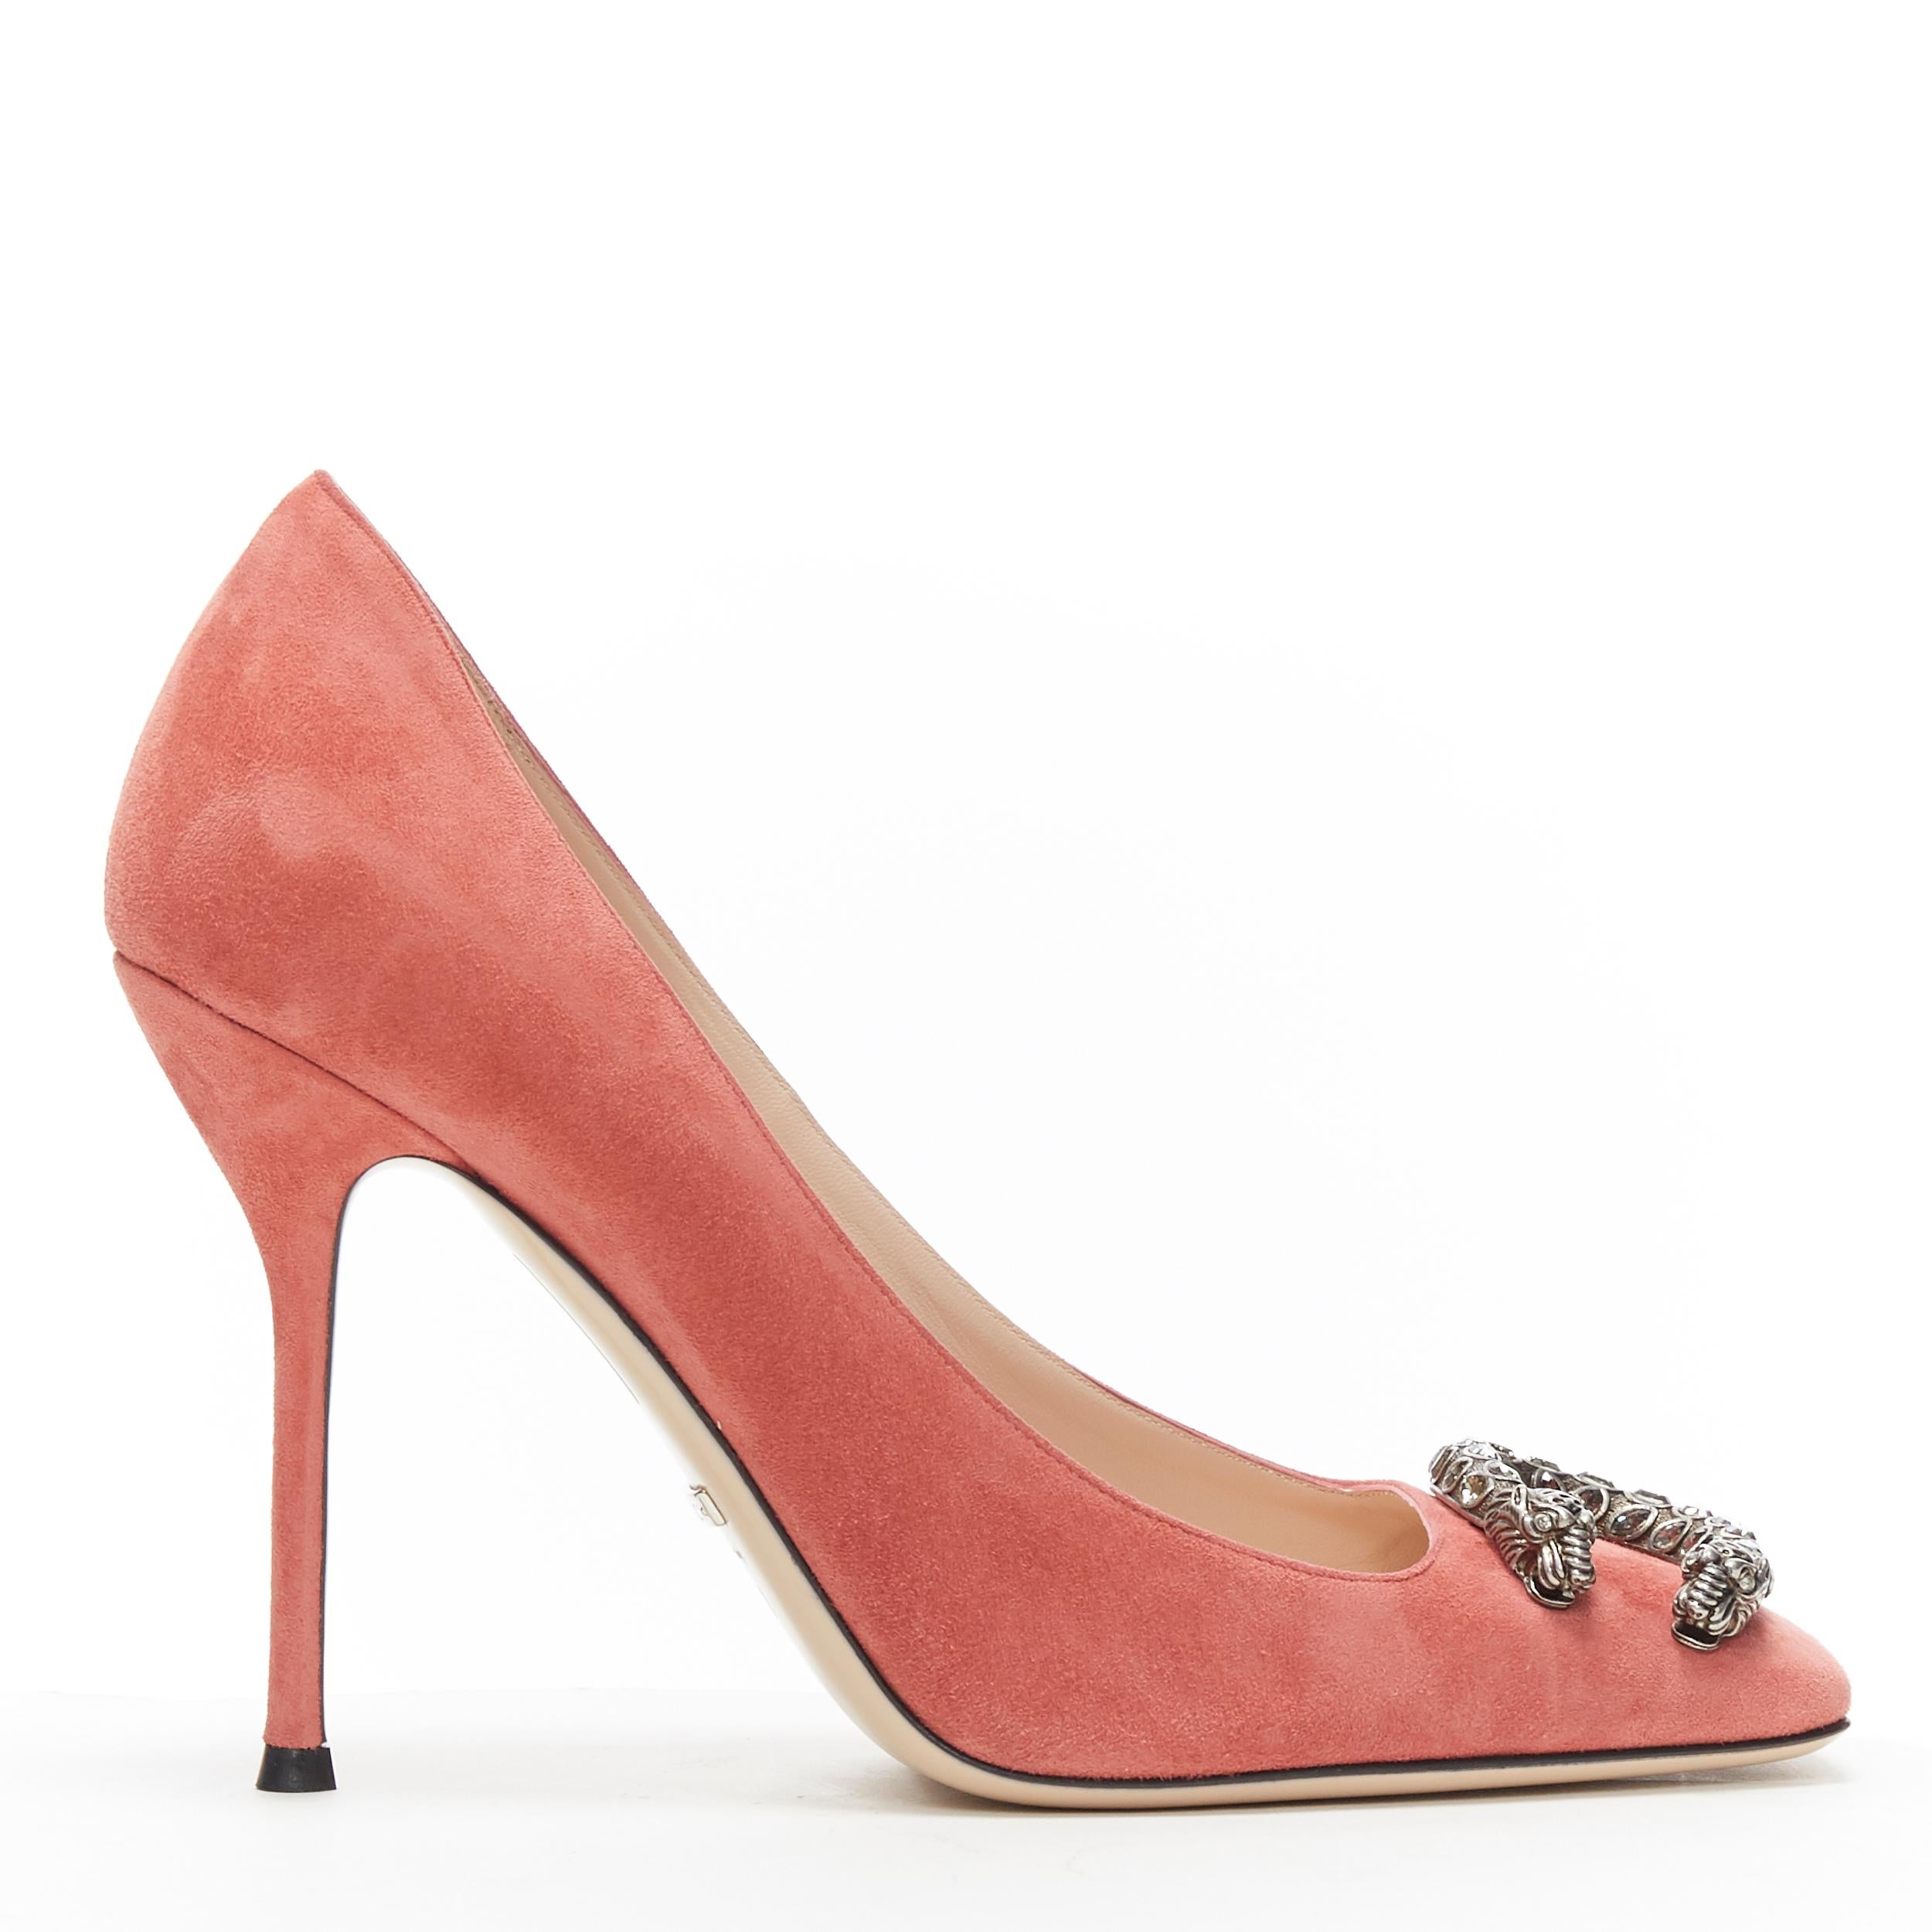 GUCCI MICHELE Dionysus pink suede silver crystal buckle square toe pump EU38
Brand: Gucci
Designer: Alessandro Michele
Model Name / Style: Dionysus 
Material: Suede
Color: Pink
Pattern: Solid
Closure: Slip on
Extra Detail: Ultra High (4 in & Higher)